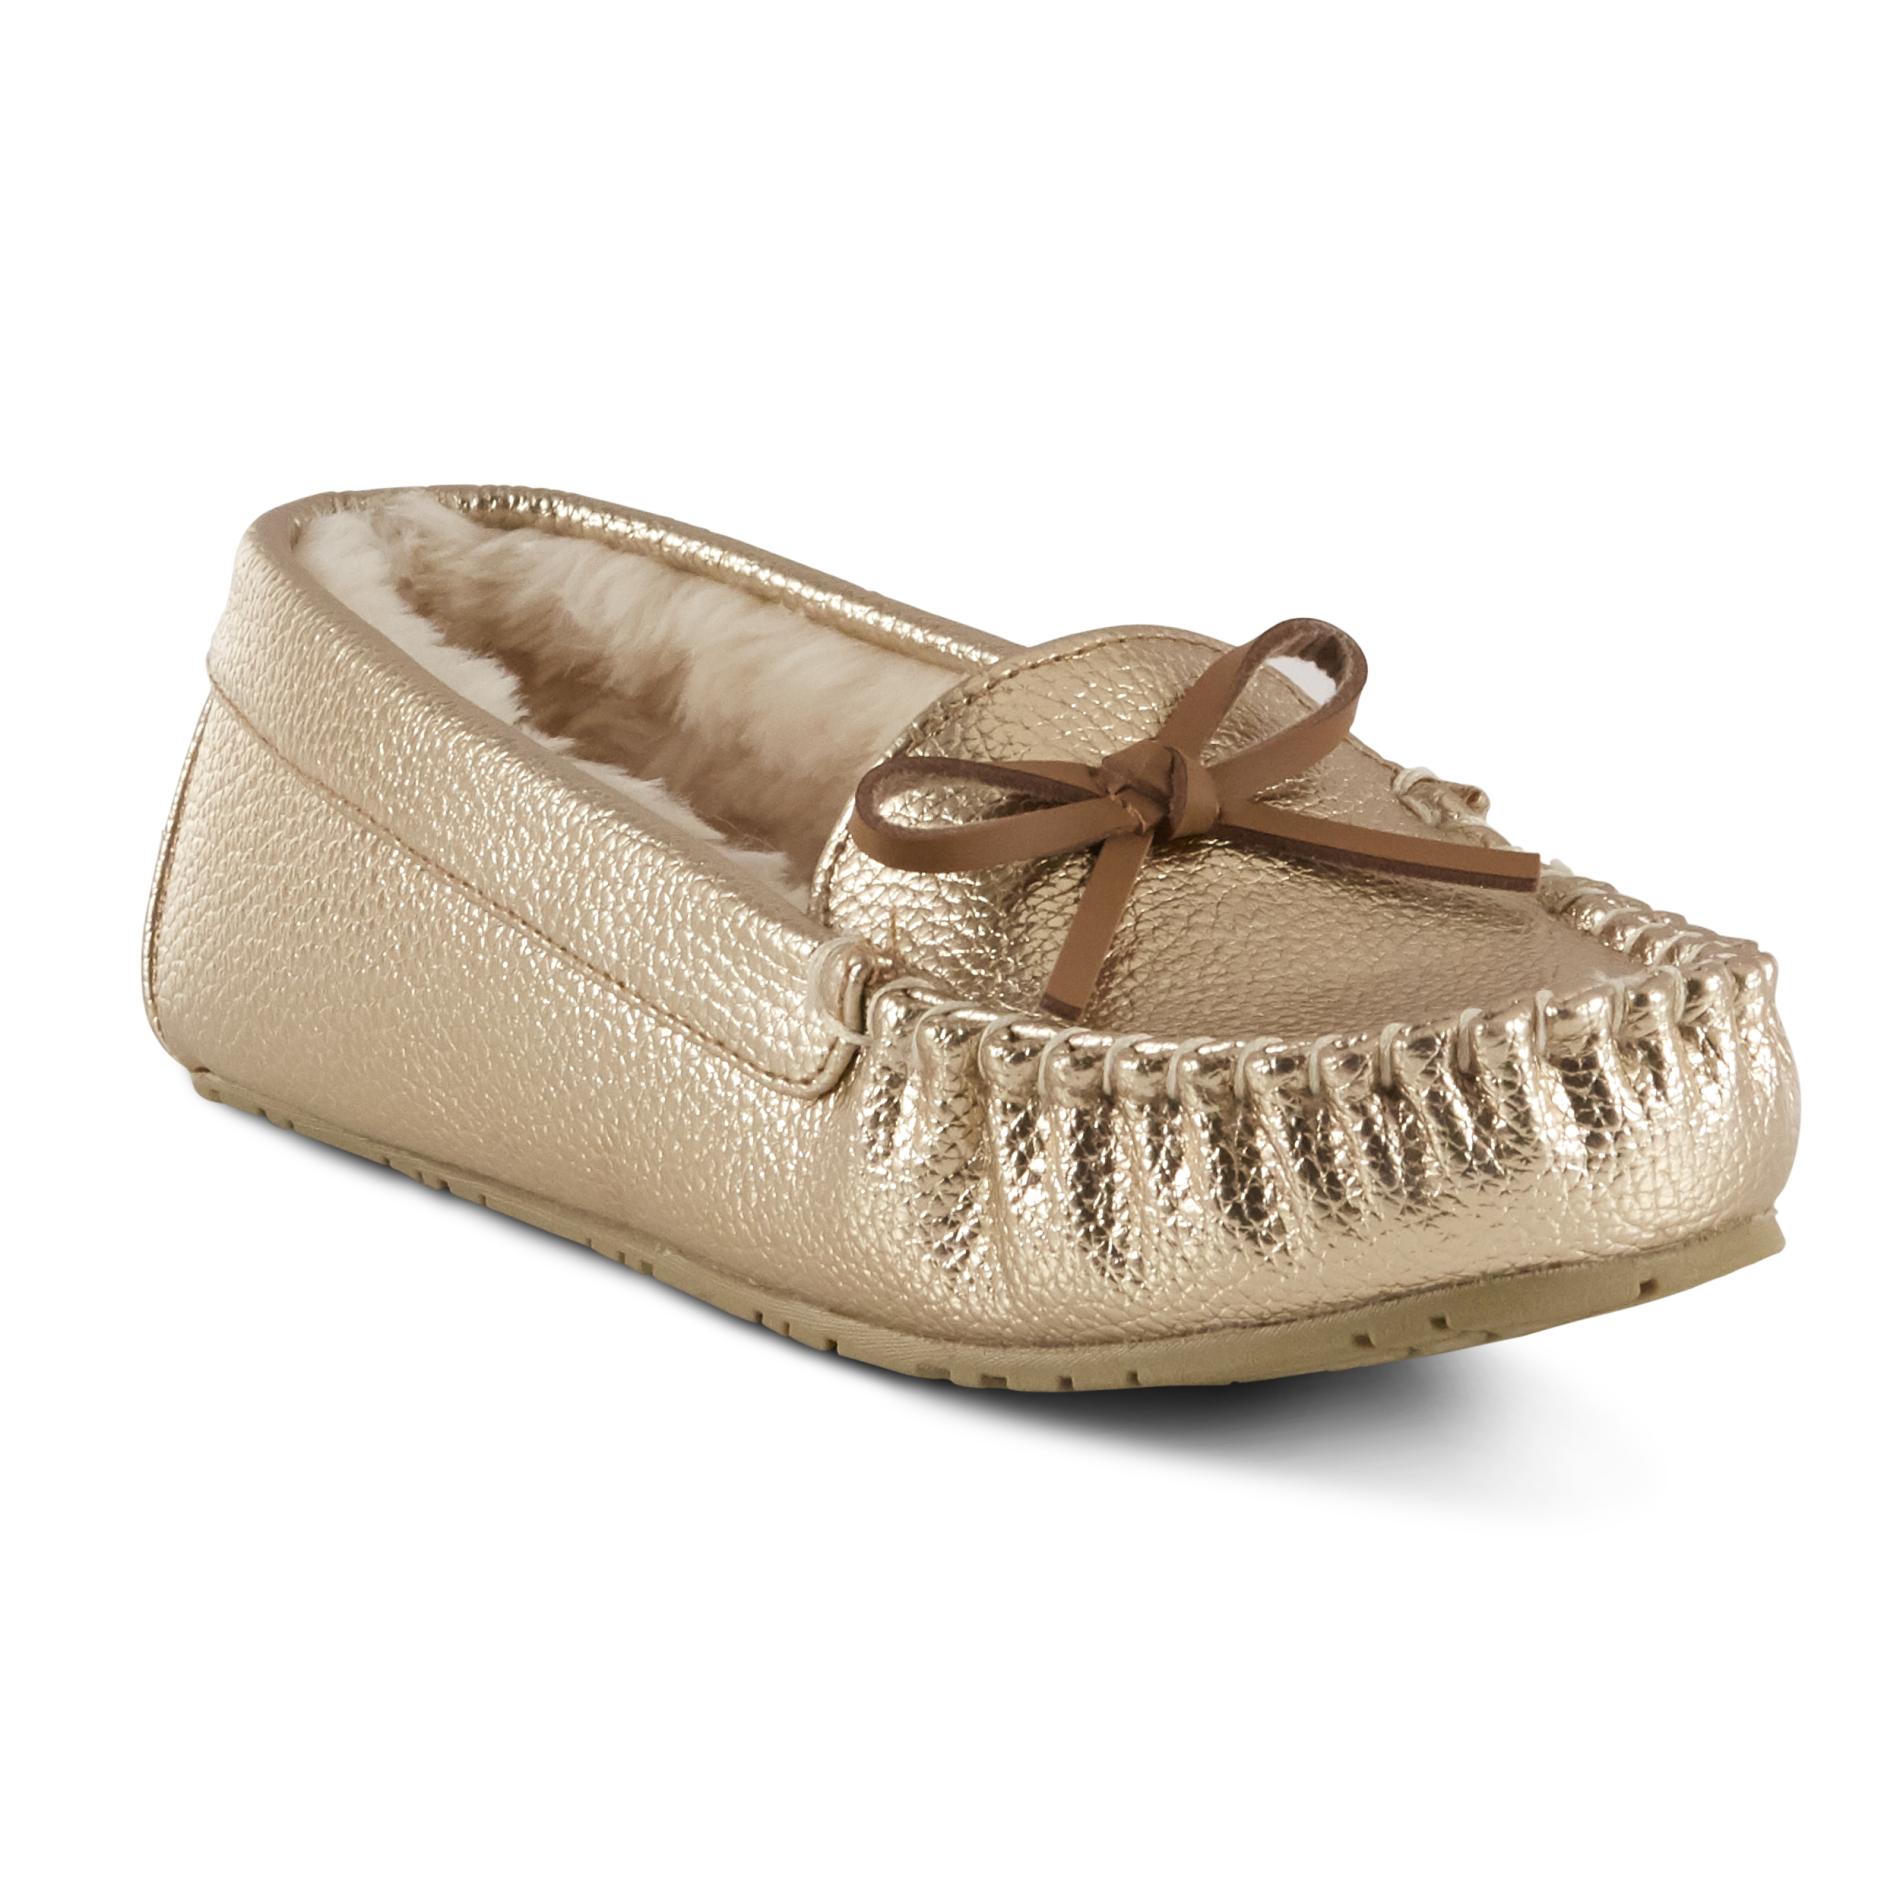 route 66 women's slippers